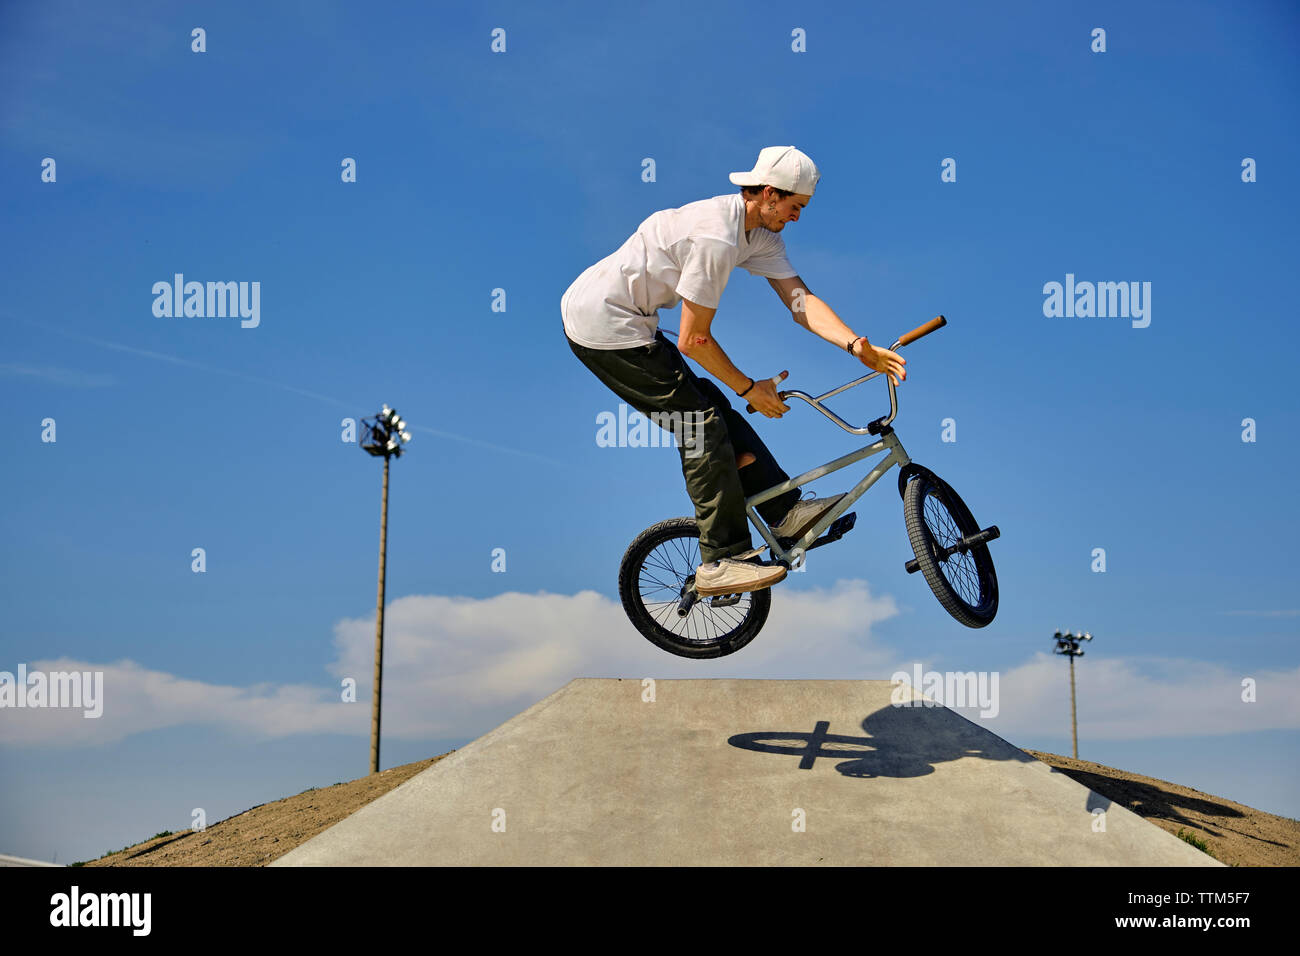 Man with BMX bike practicing barspin on sports ramp against blue sky during sunny day Stock Photo